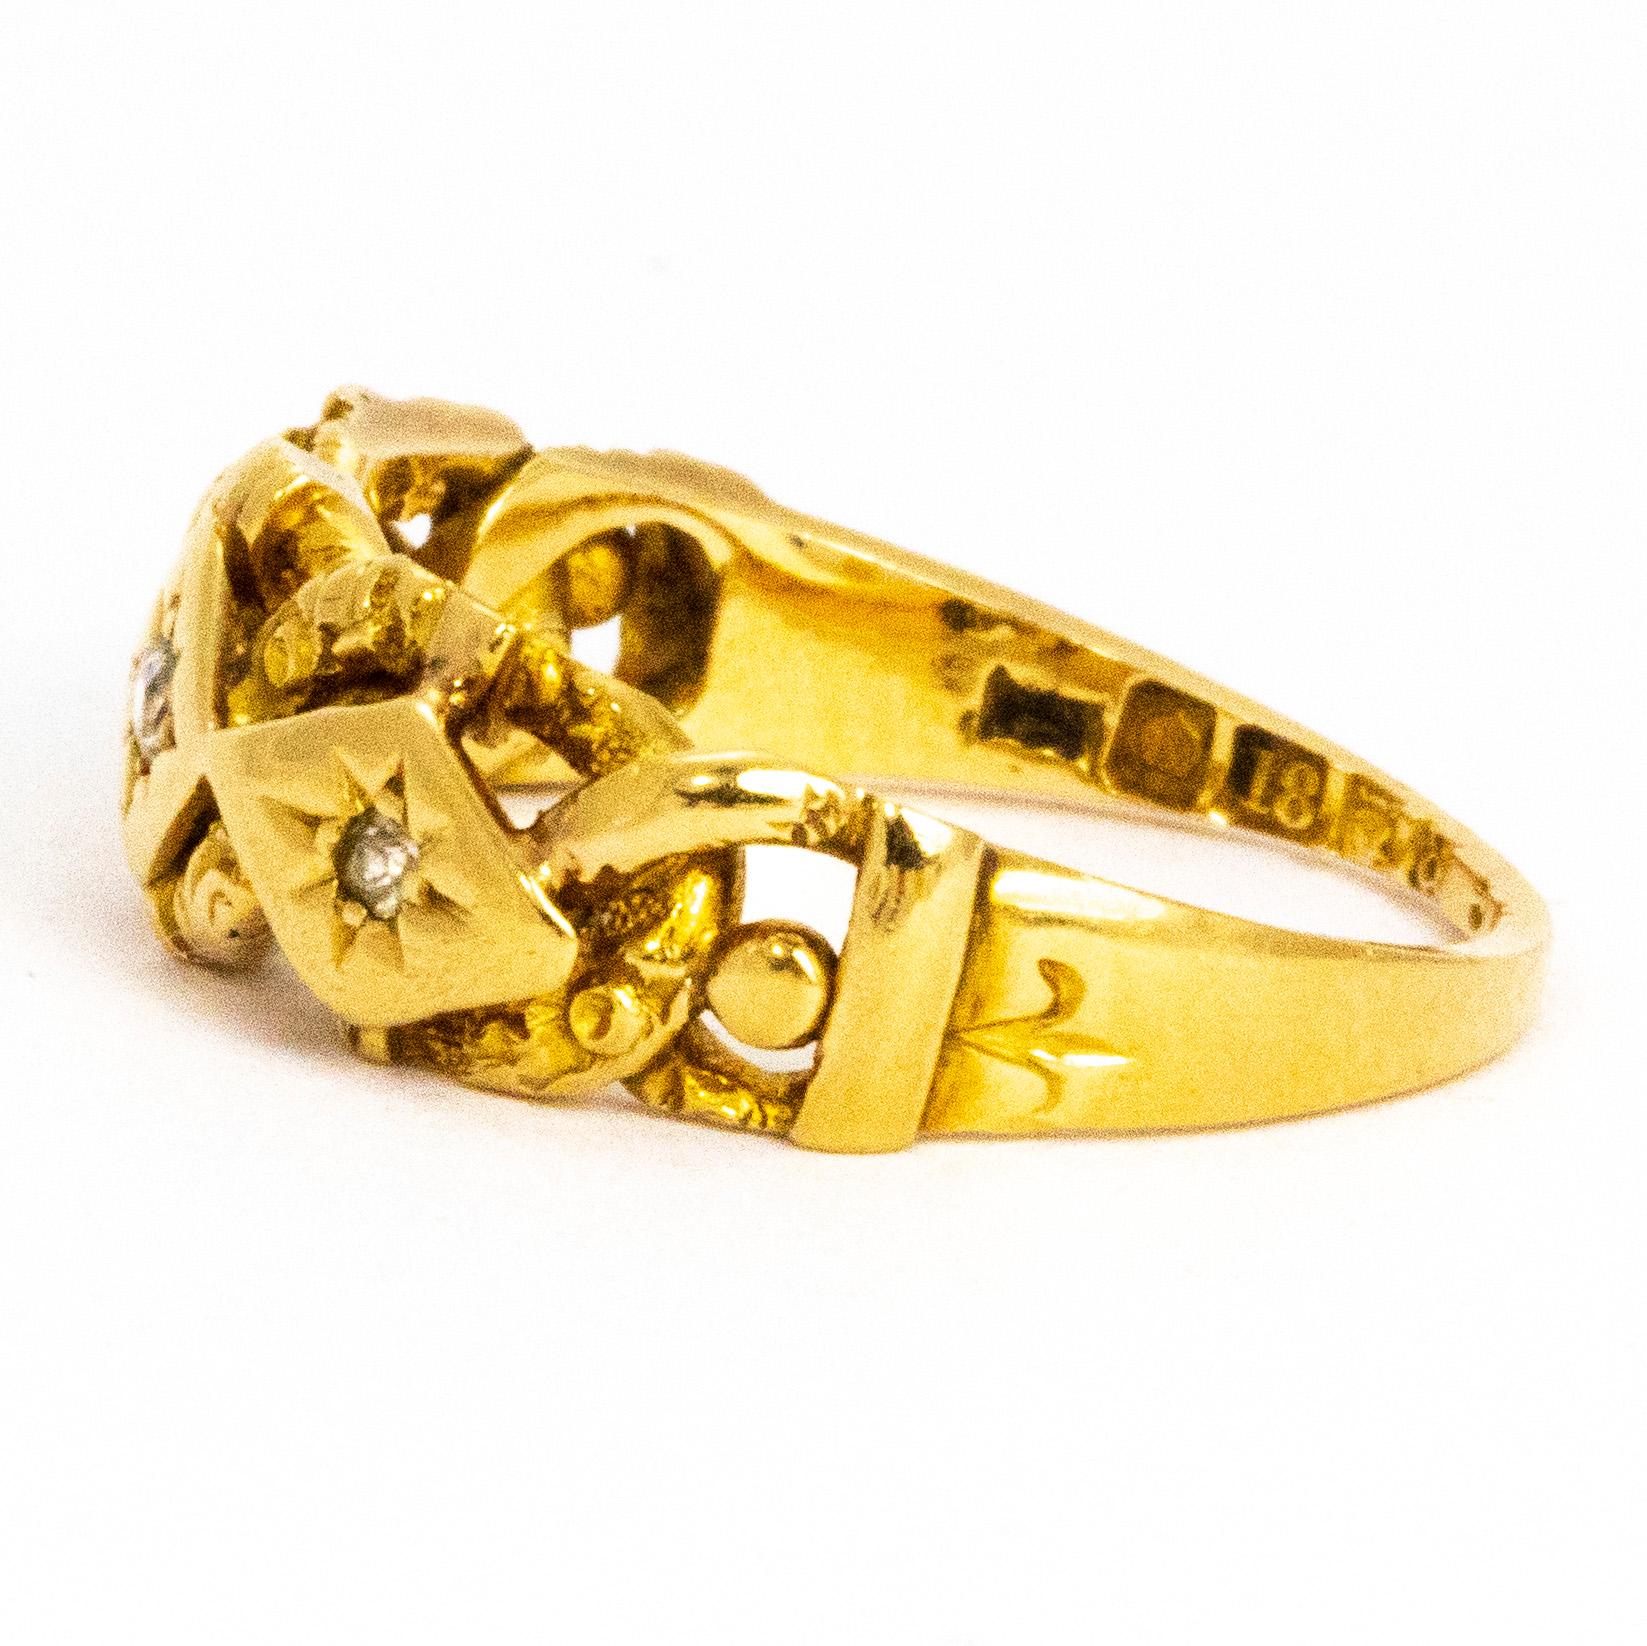 This highly decorative gypsy ring features interlocking chain detail. The glossy 18ct gold holds three diamonds in star settings on smooth gold panelling whilst the chain detail is woven around it. The centre diamond in this ring measures